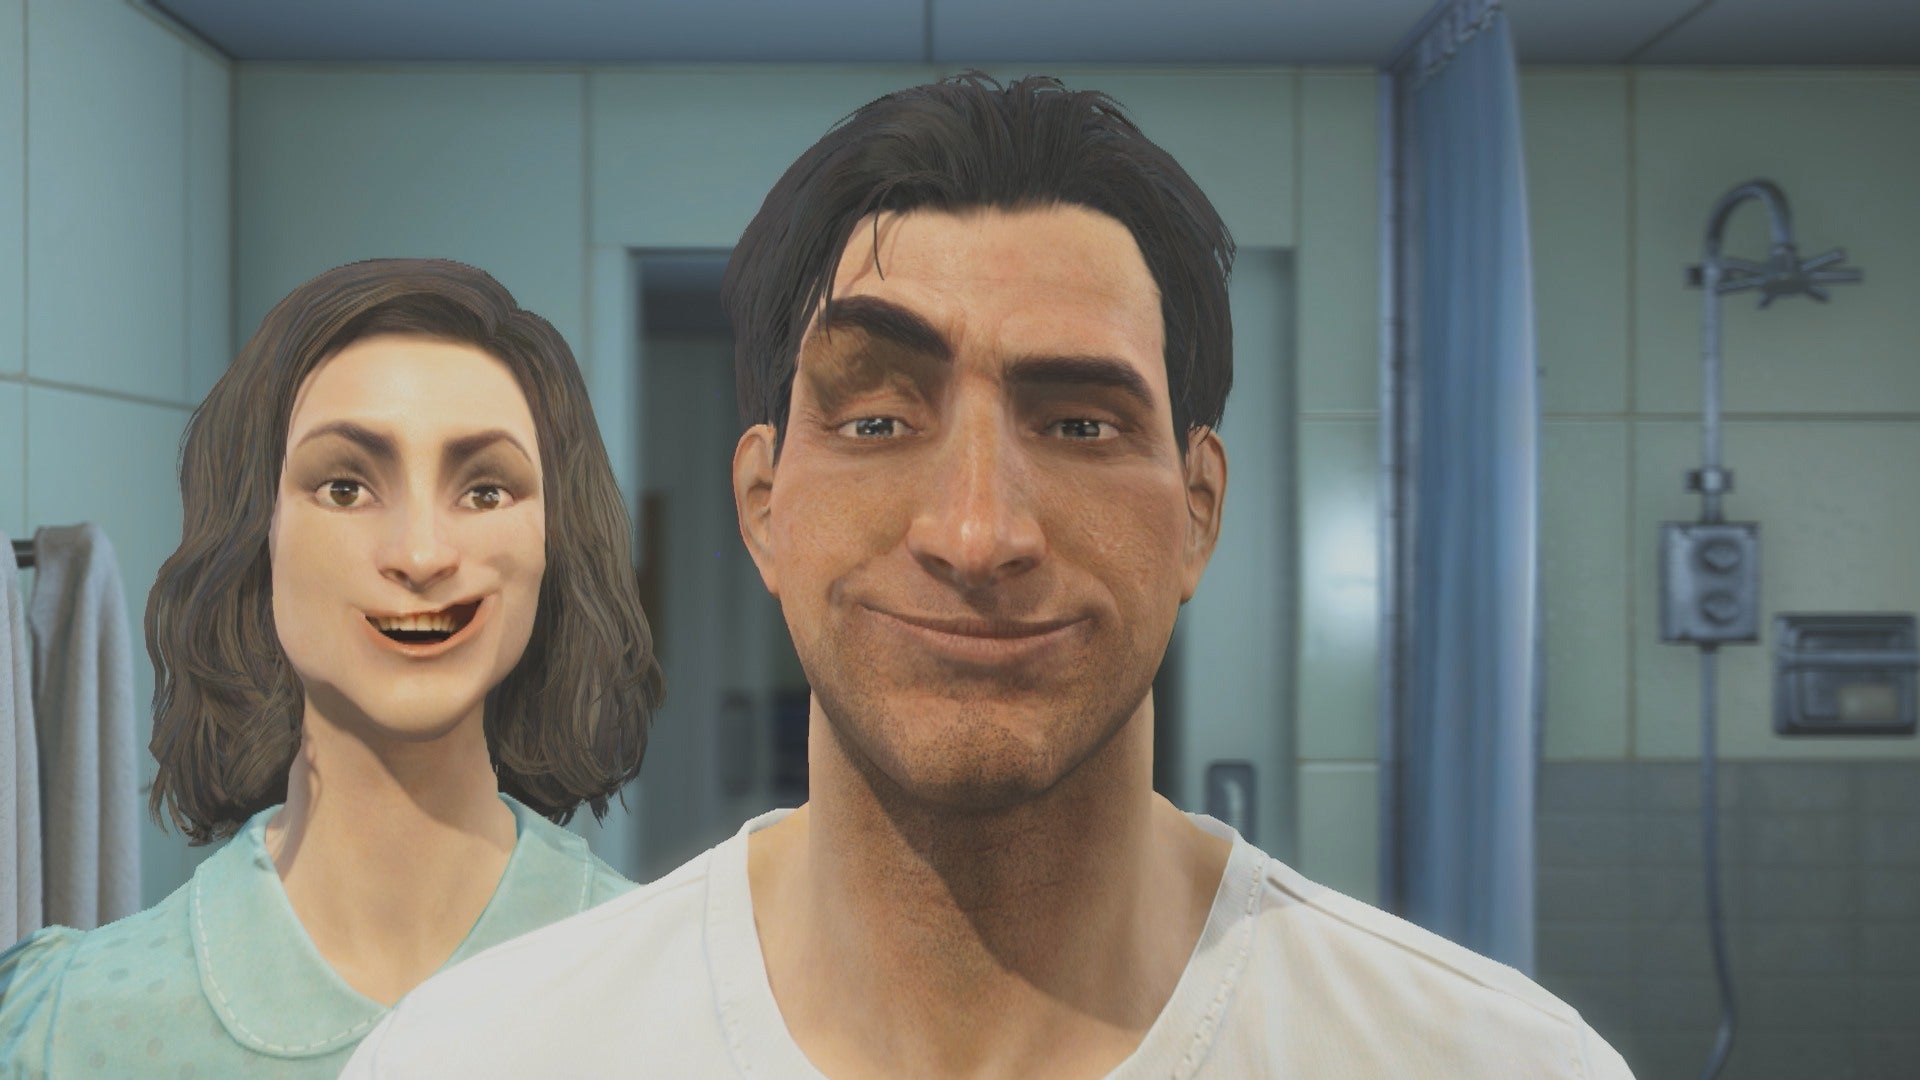 FALLOUT 4: Installing Mods using Nexus Mod Manager (NMM) **UPDATED